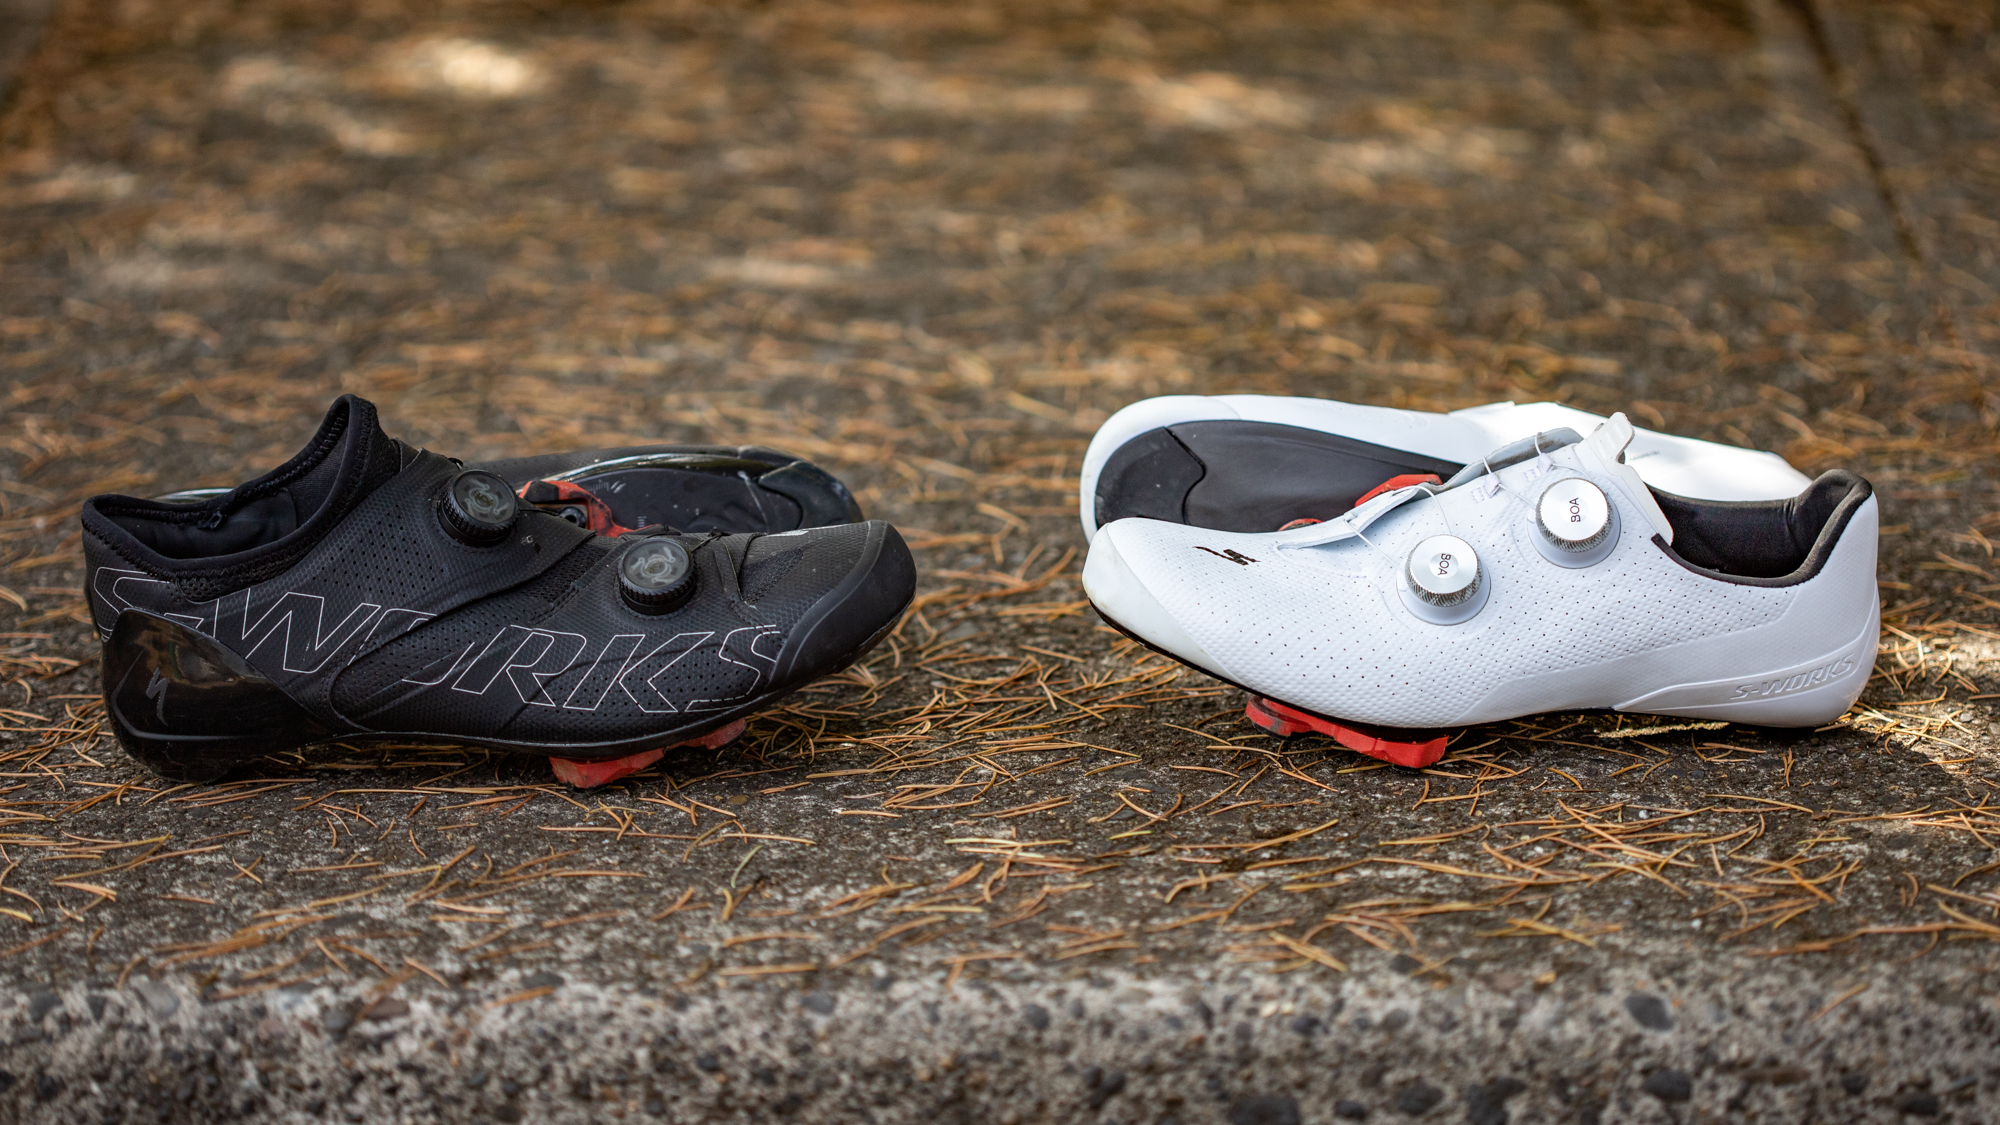 Power transfer or all-round comfort and style? S-Works Ares vs